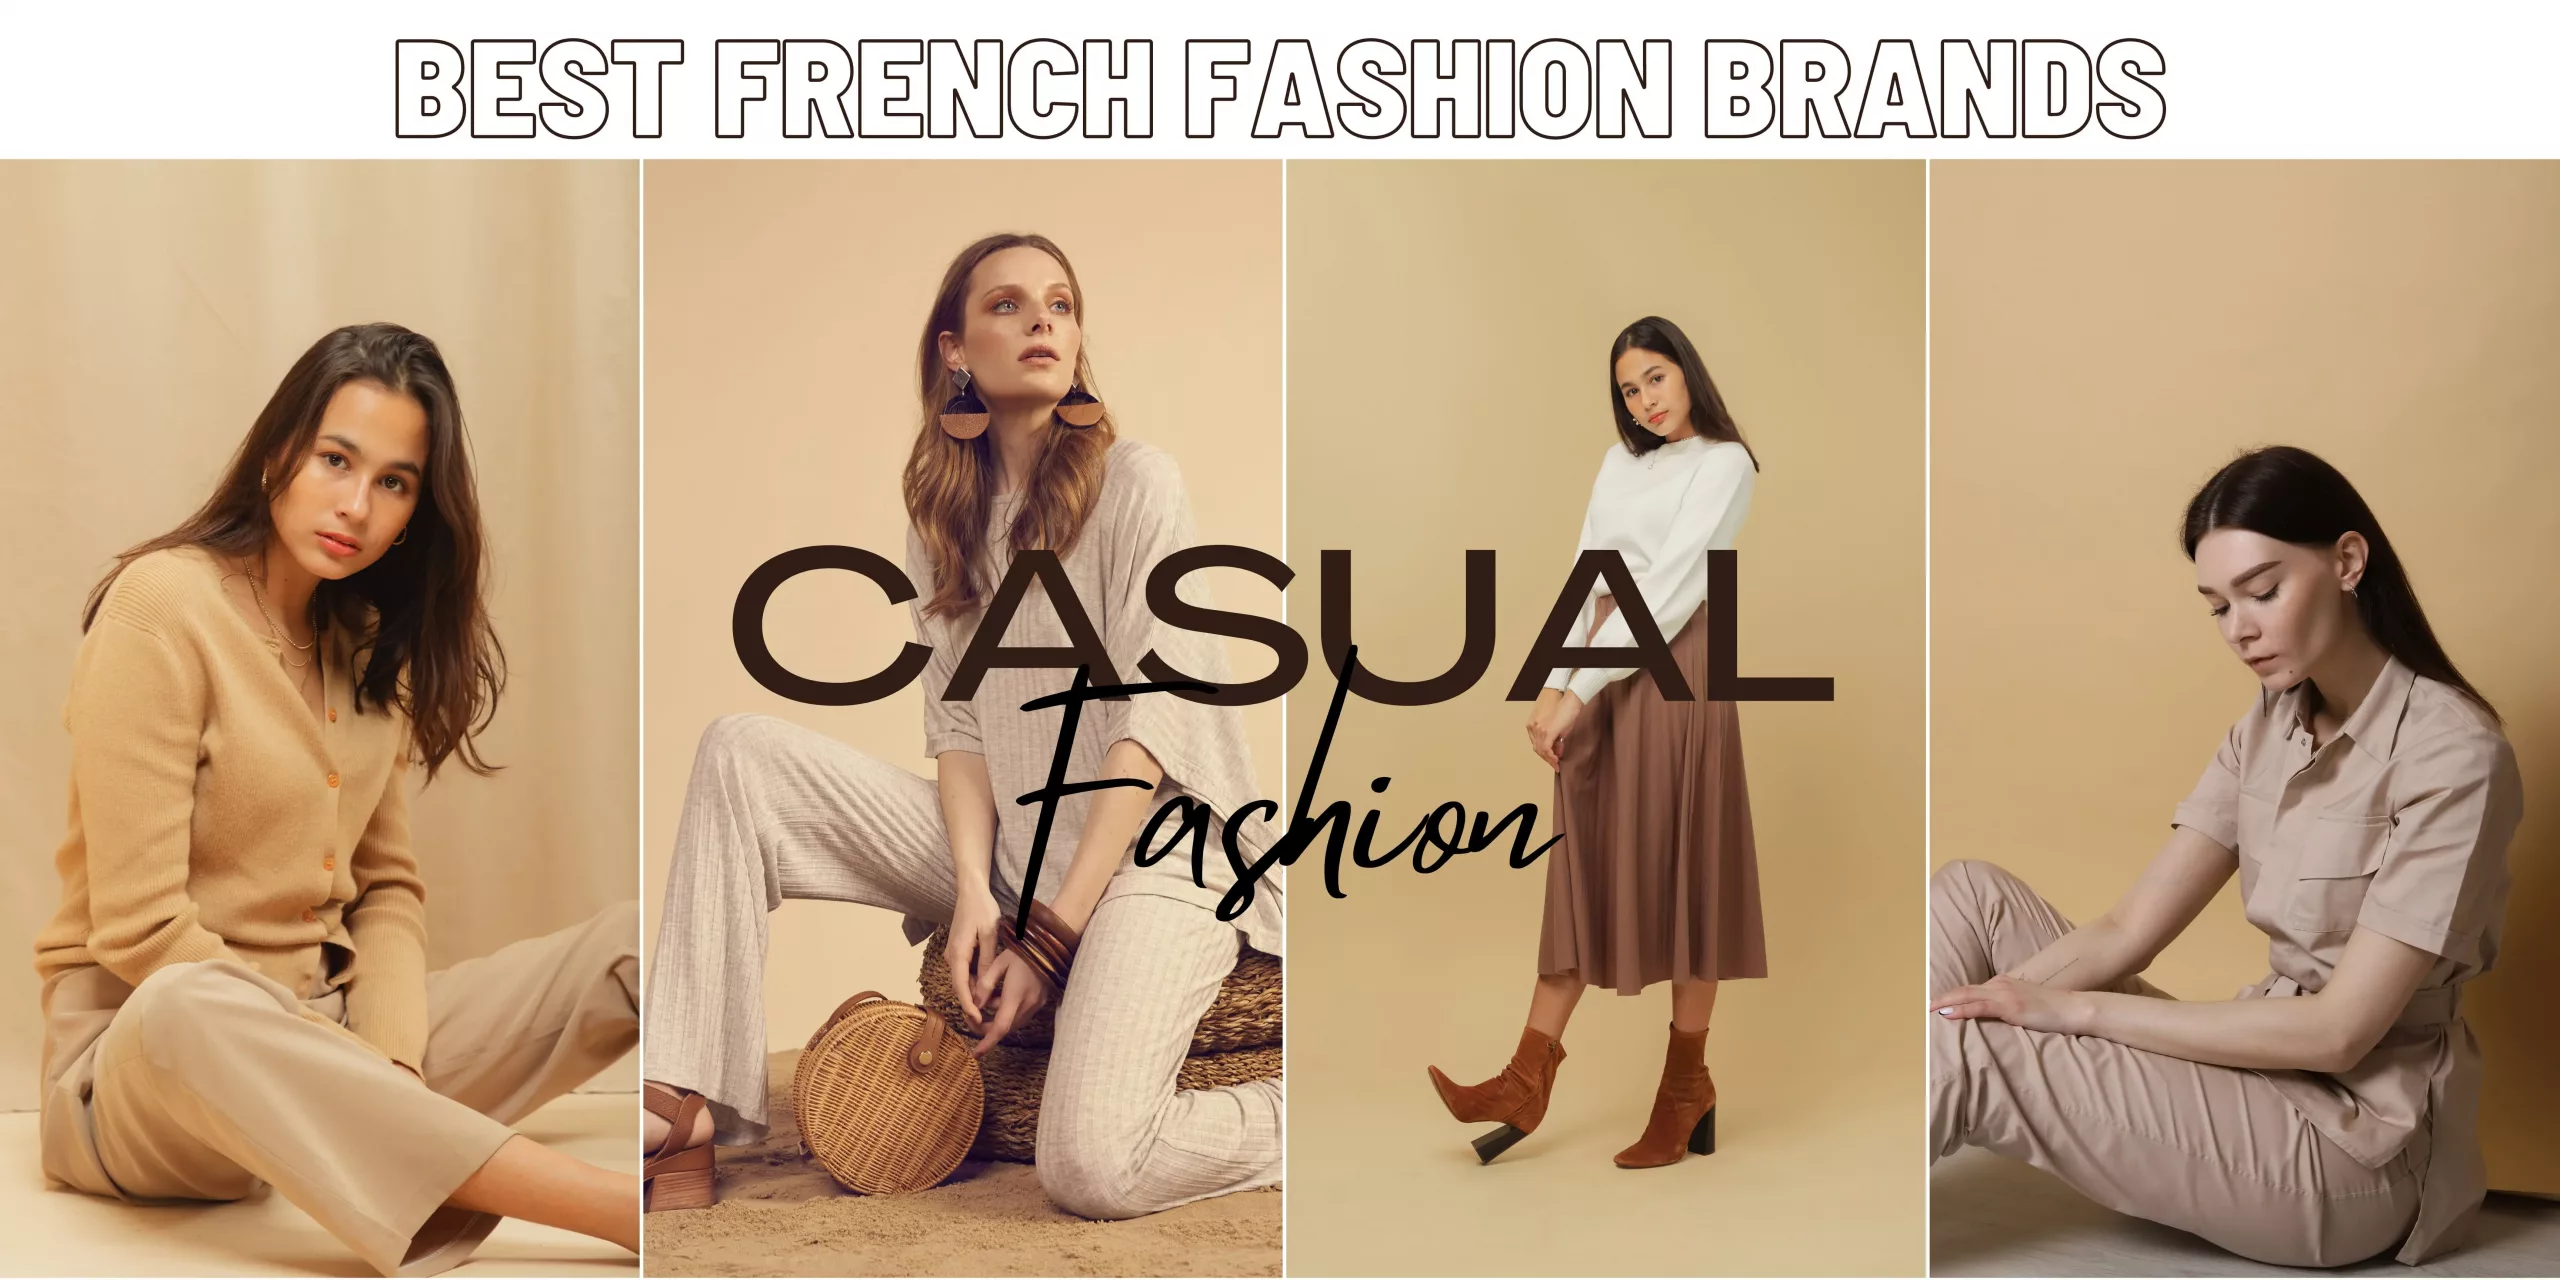 French fashion brands